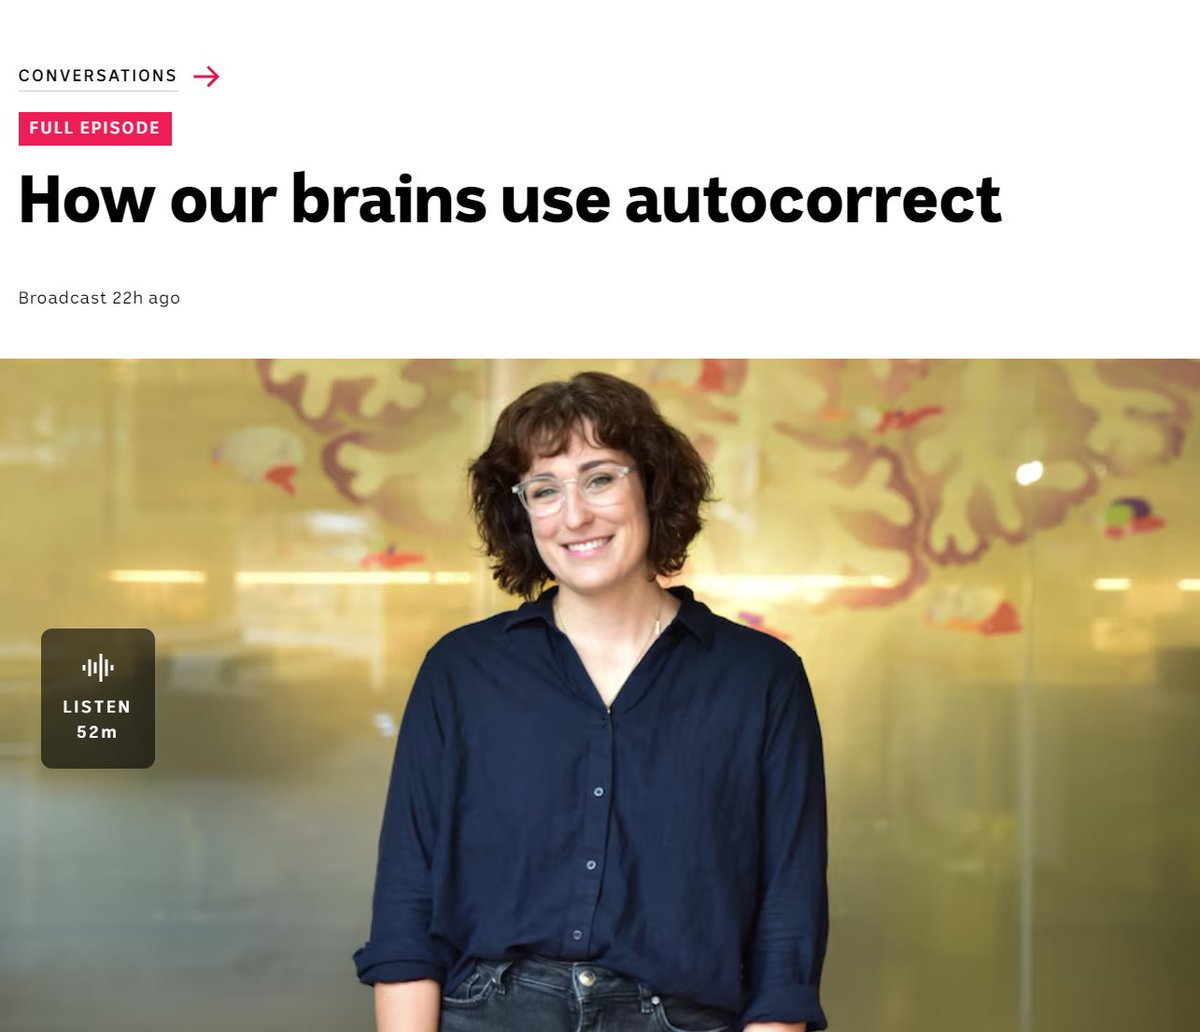 Ever wondered how strokes can alter not just our brains, but also our perception of reality?

#QBI researcher @_MJ_Moore_ joins @SarahKanowski on ABC listen to discuss the mysteries of #stroke and how our brain's predictions shape our experiences.

Listen:
bit.ly/3Wqfh18